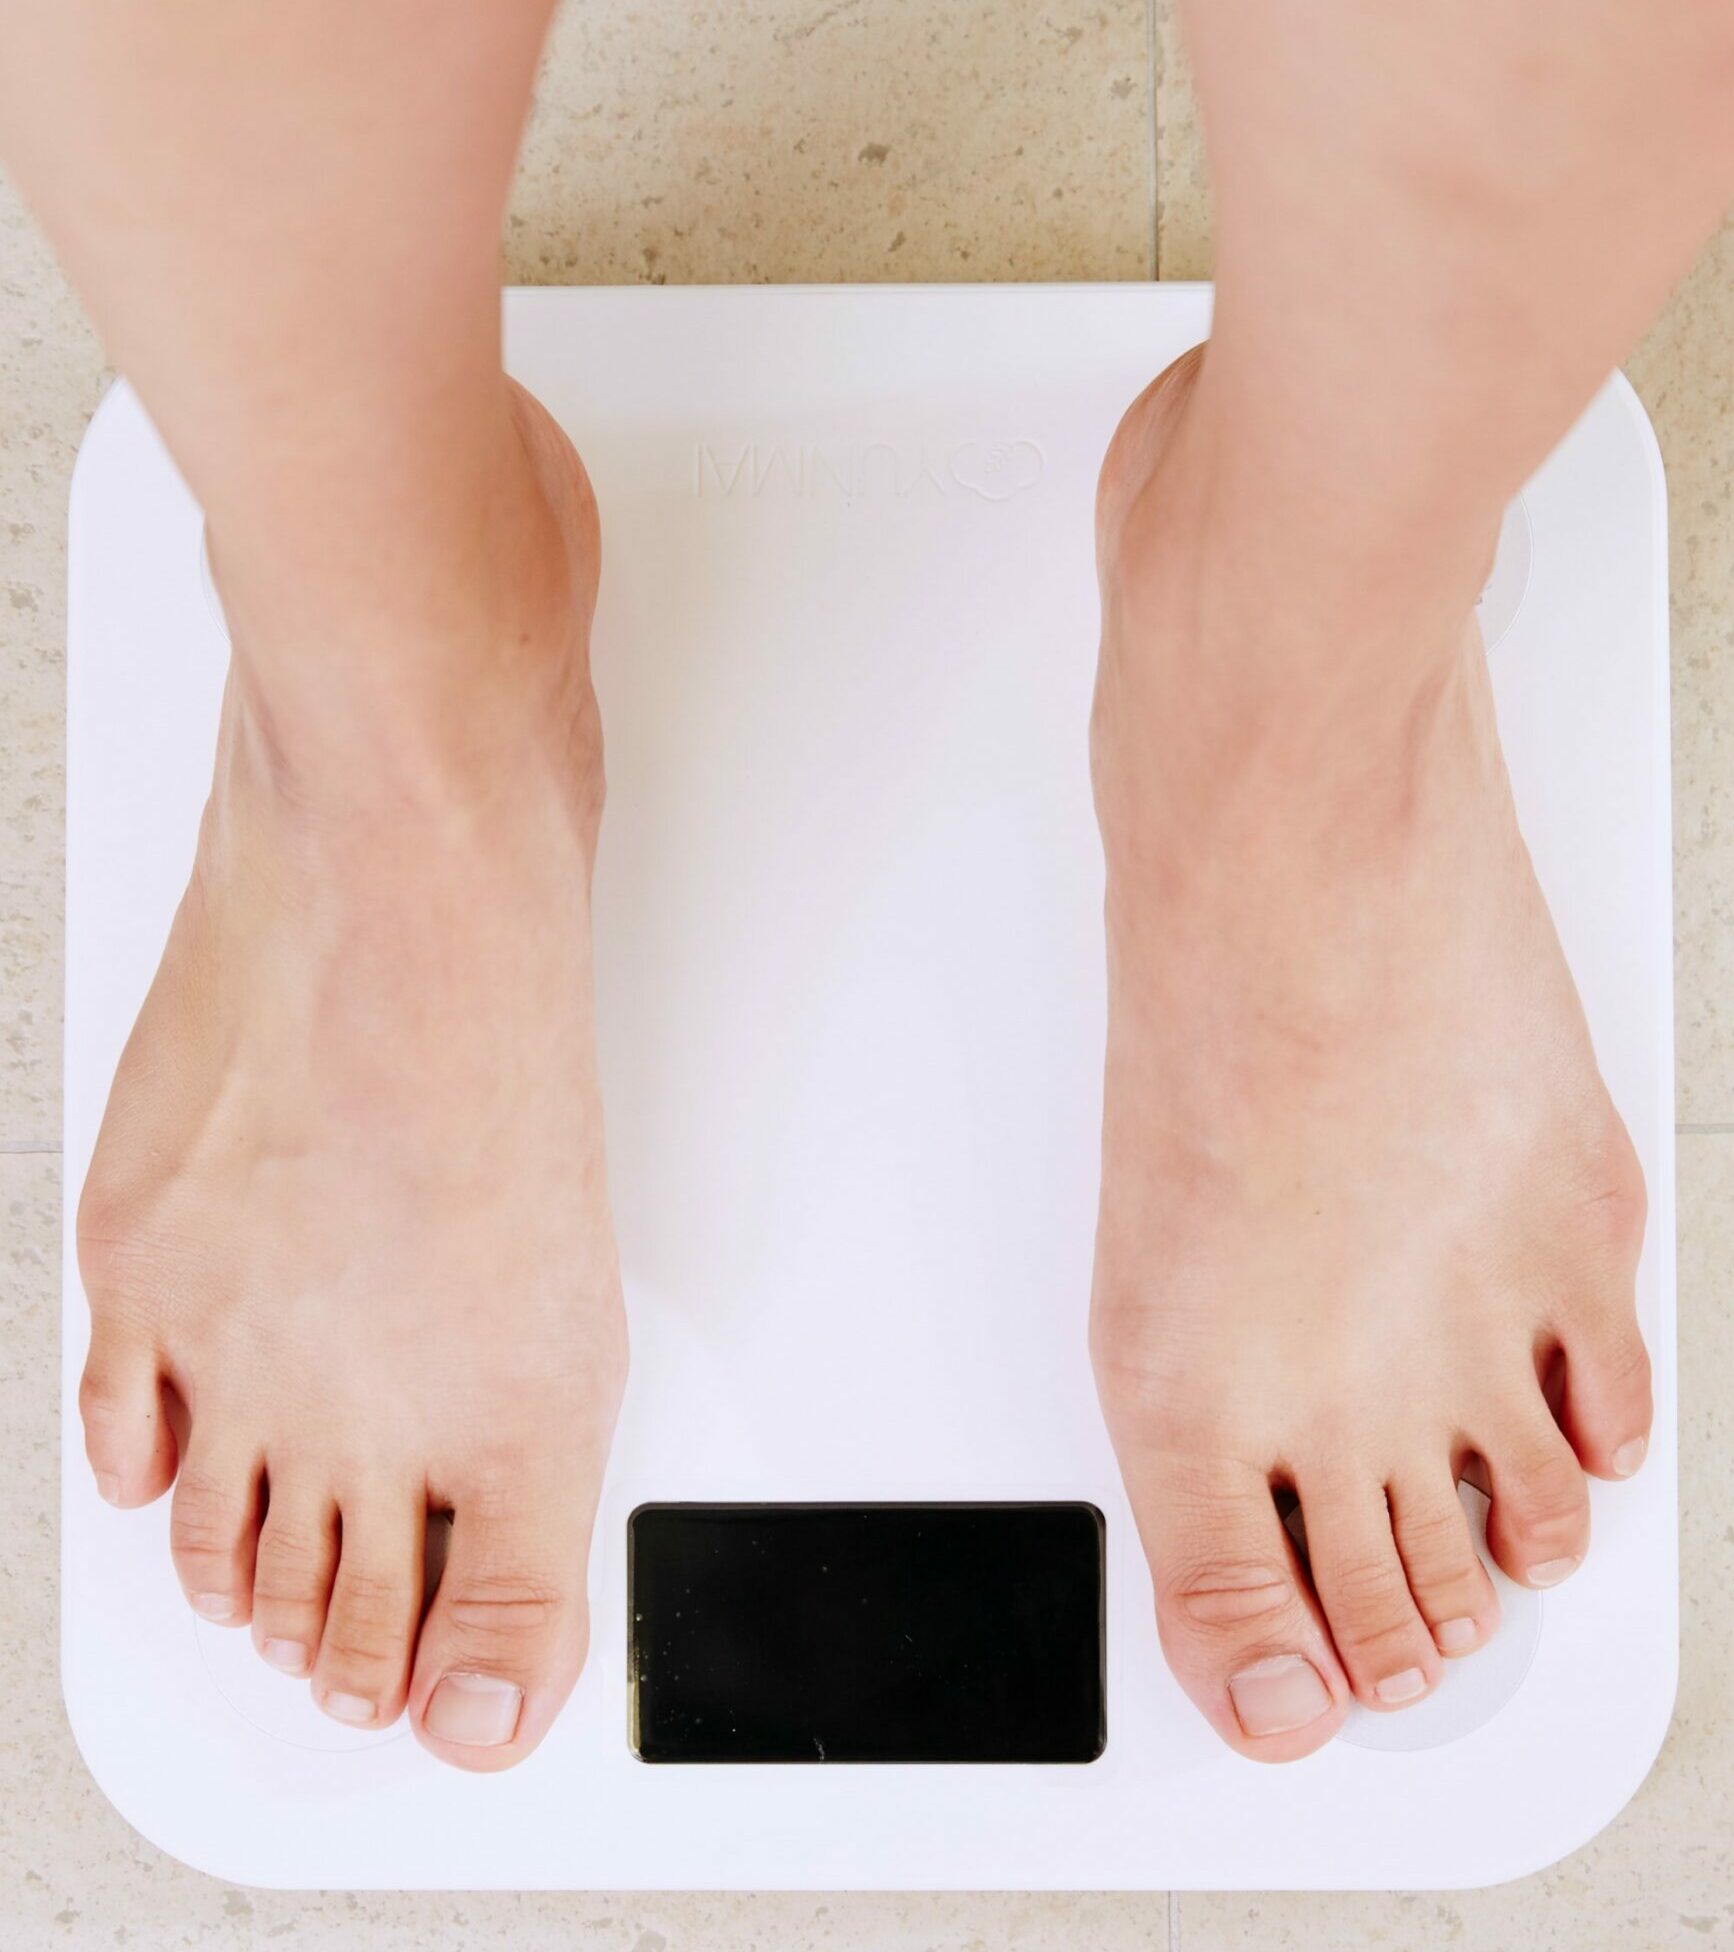 Image of an individual measuring their weight with a scale